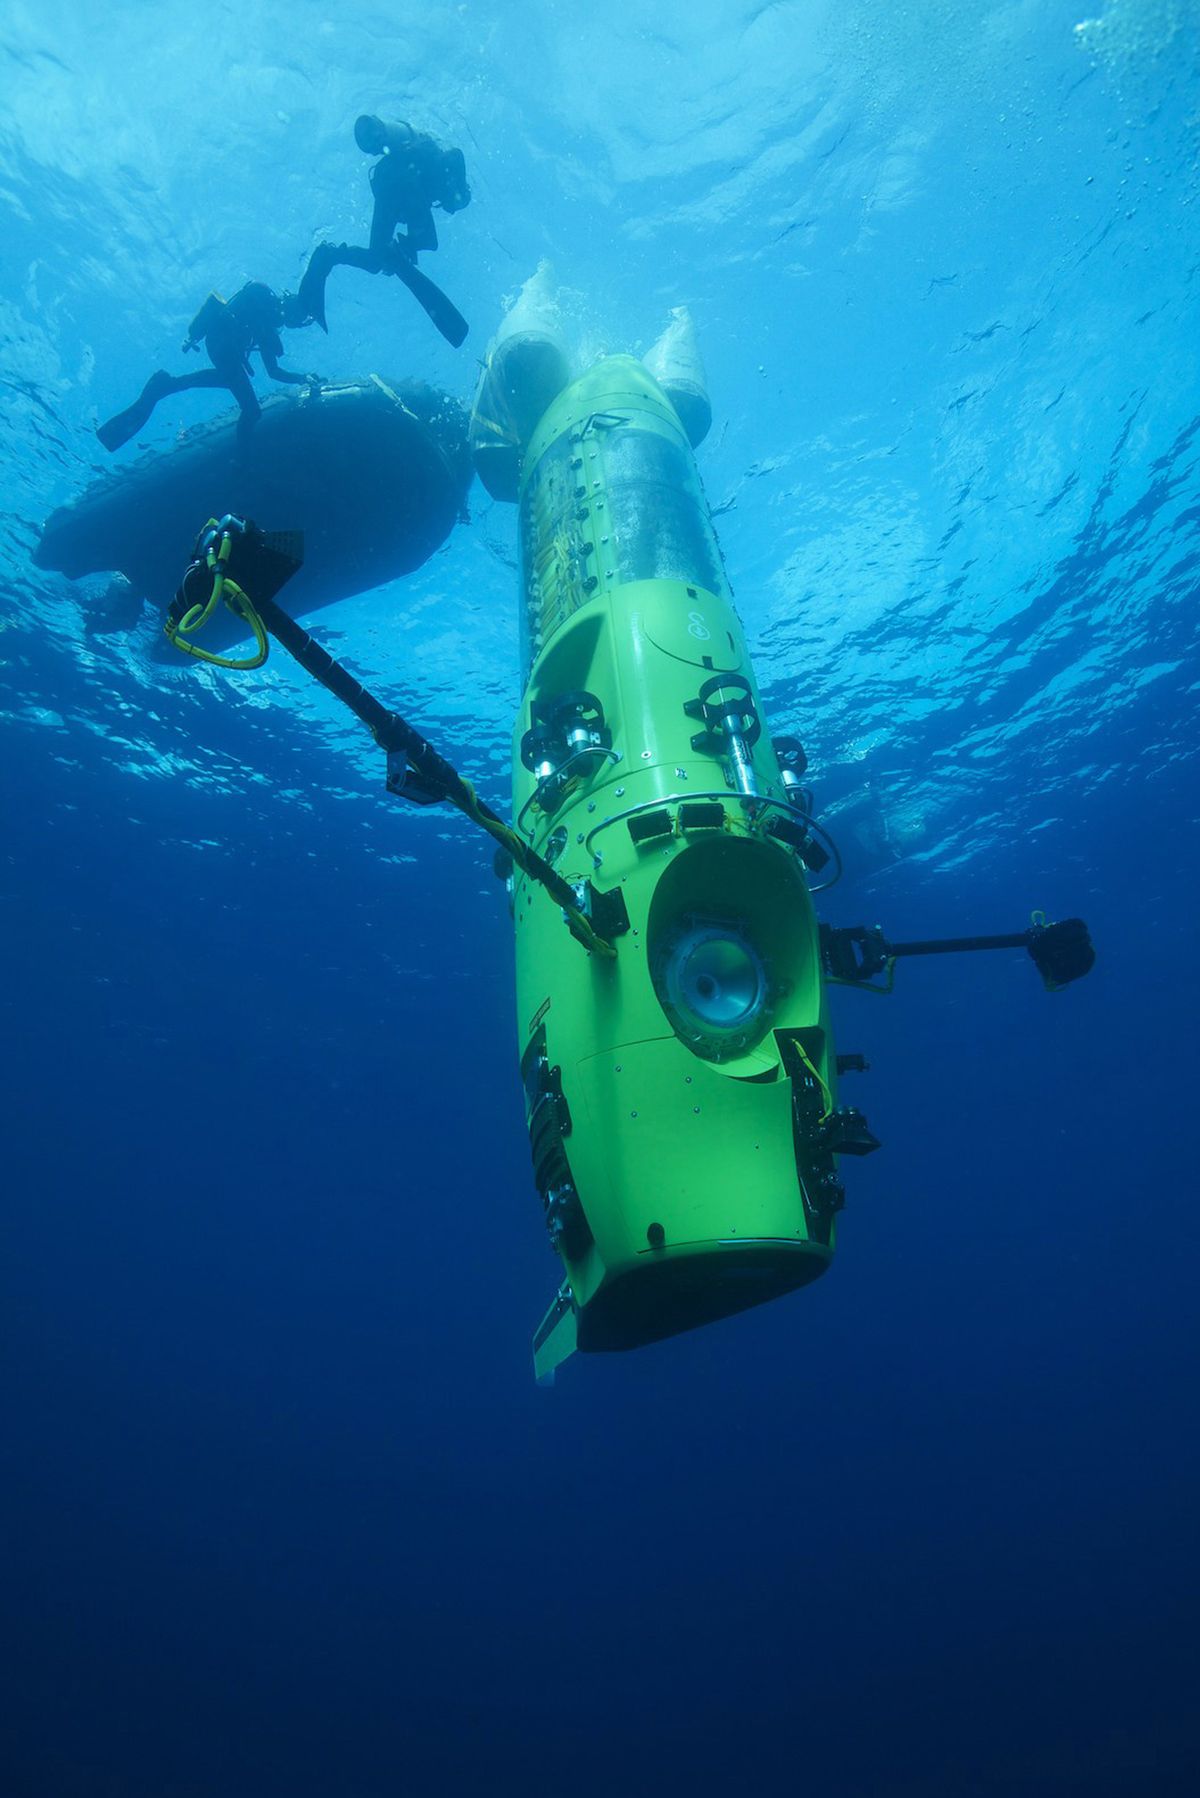 The Deepsea Challenger submersible begins its first test dive off the coast of Papua New Guinea in February. The submersible will explore the Mariana Trench, nearly 7 miles deep in the South Pacific.